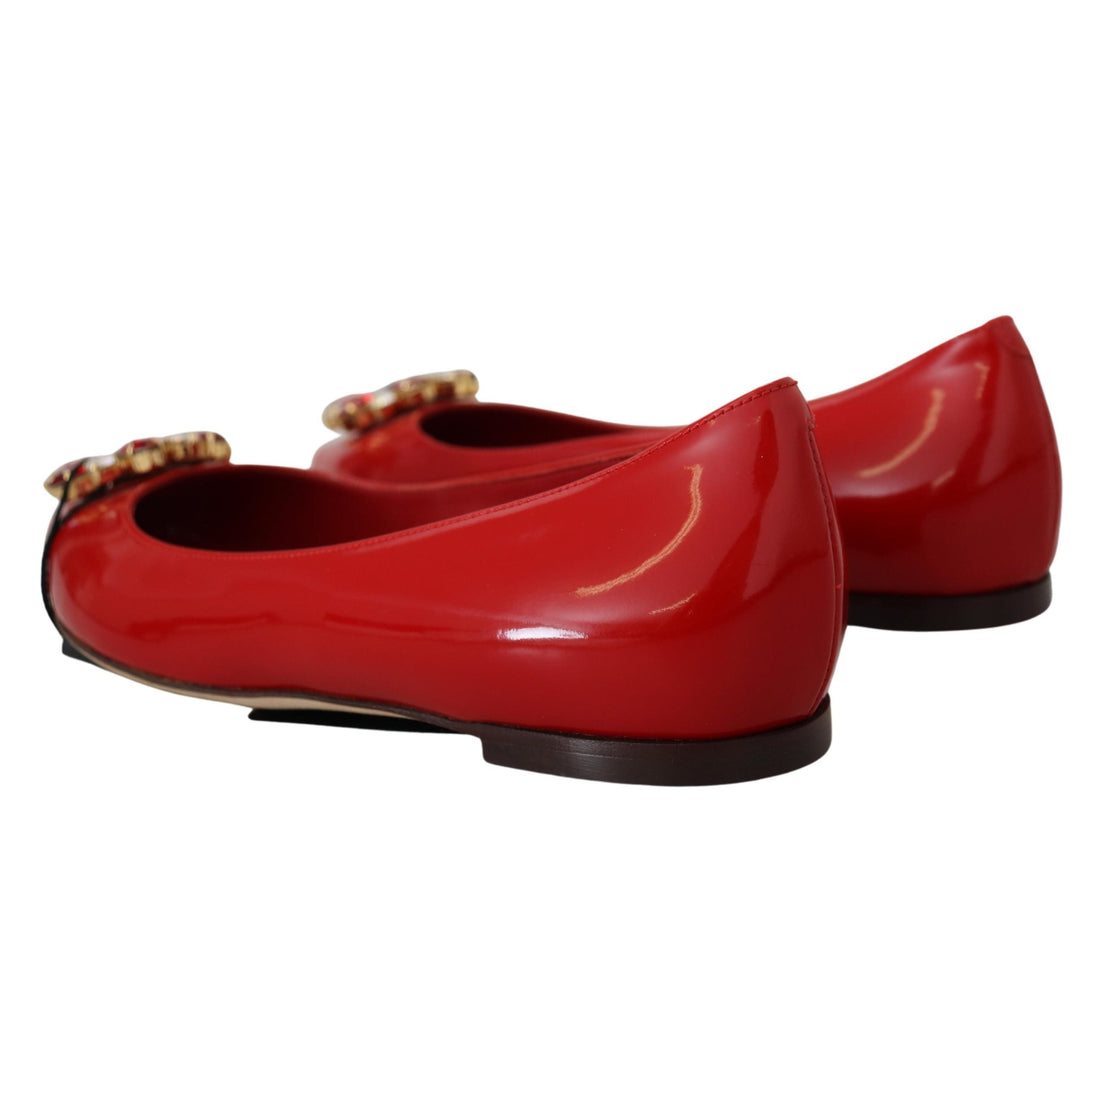 Dolce & Gabbana Red Suede Crystal Loafers - Exquisite Elegance